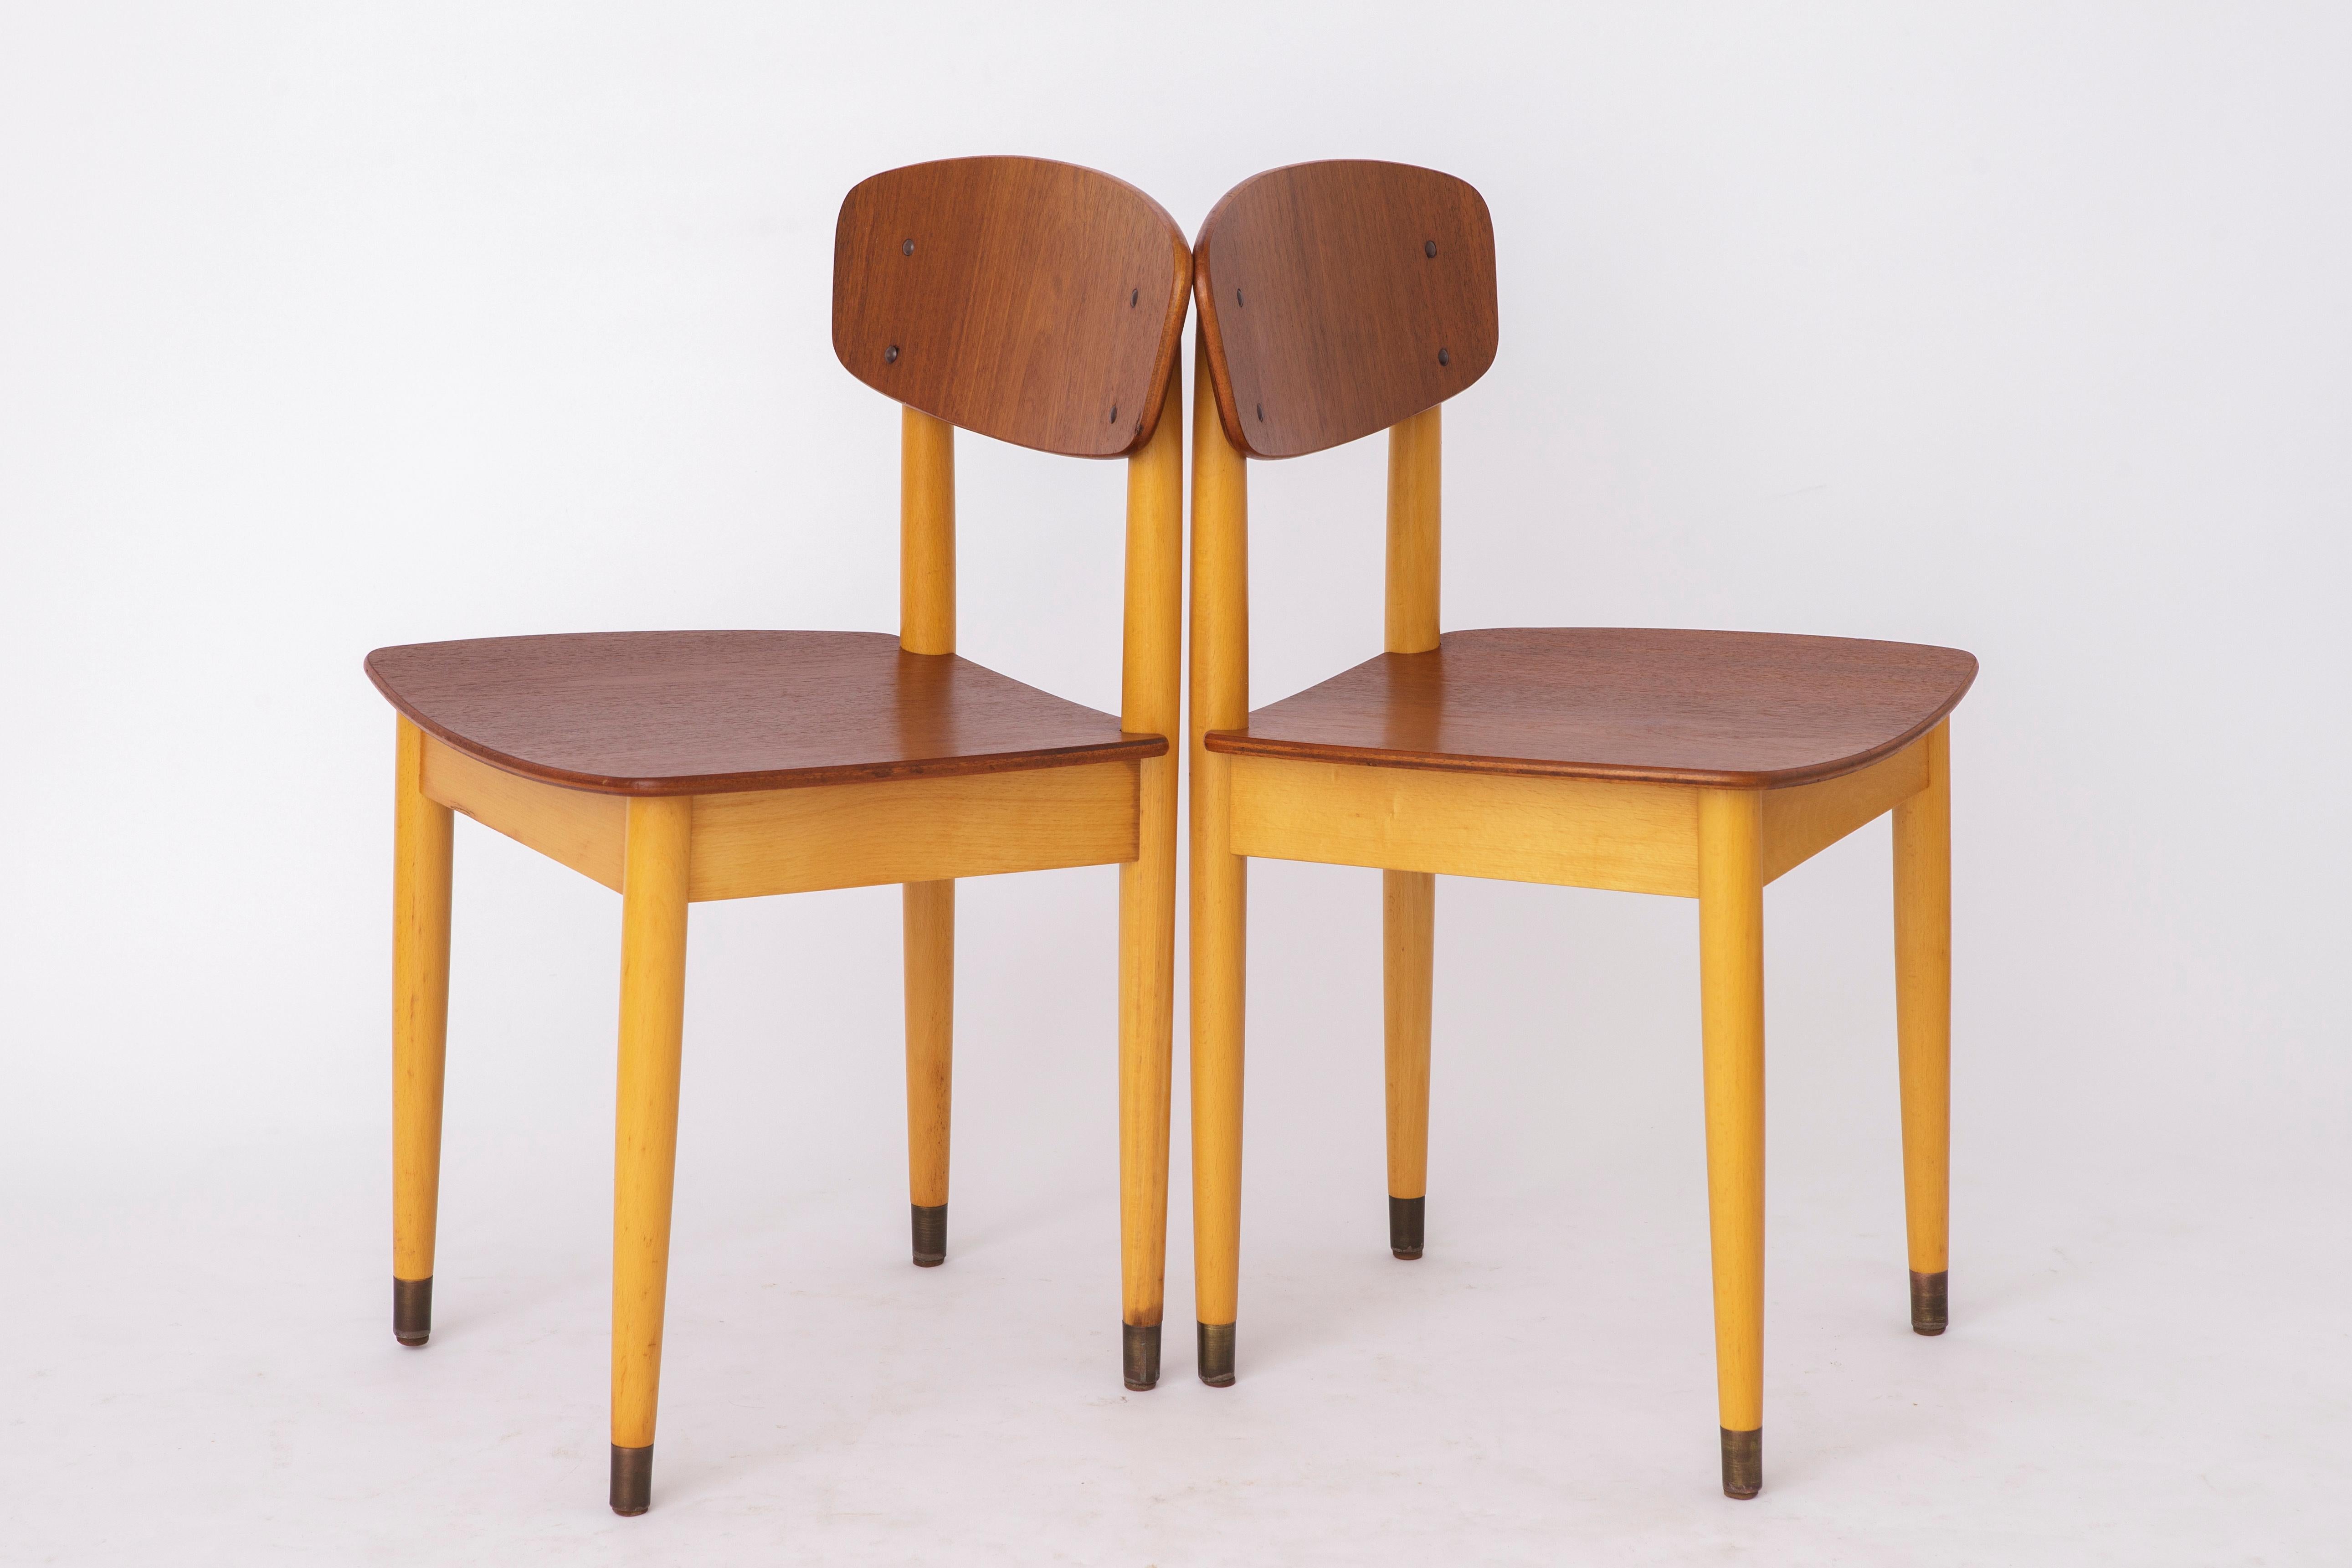 Pair mid century vintage chairs. Unknown manufacturer. 
Origin: most likely Germany or Netherlands. 
Displayed price is for a pair. Totally up to 4 chairs available. 

Stable wood frames. No wobbling corner joints. 
Seat and back part are made of